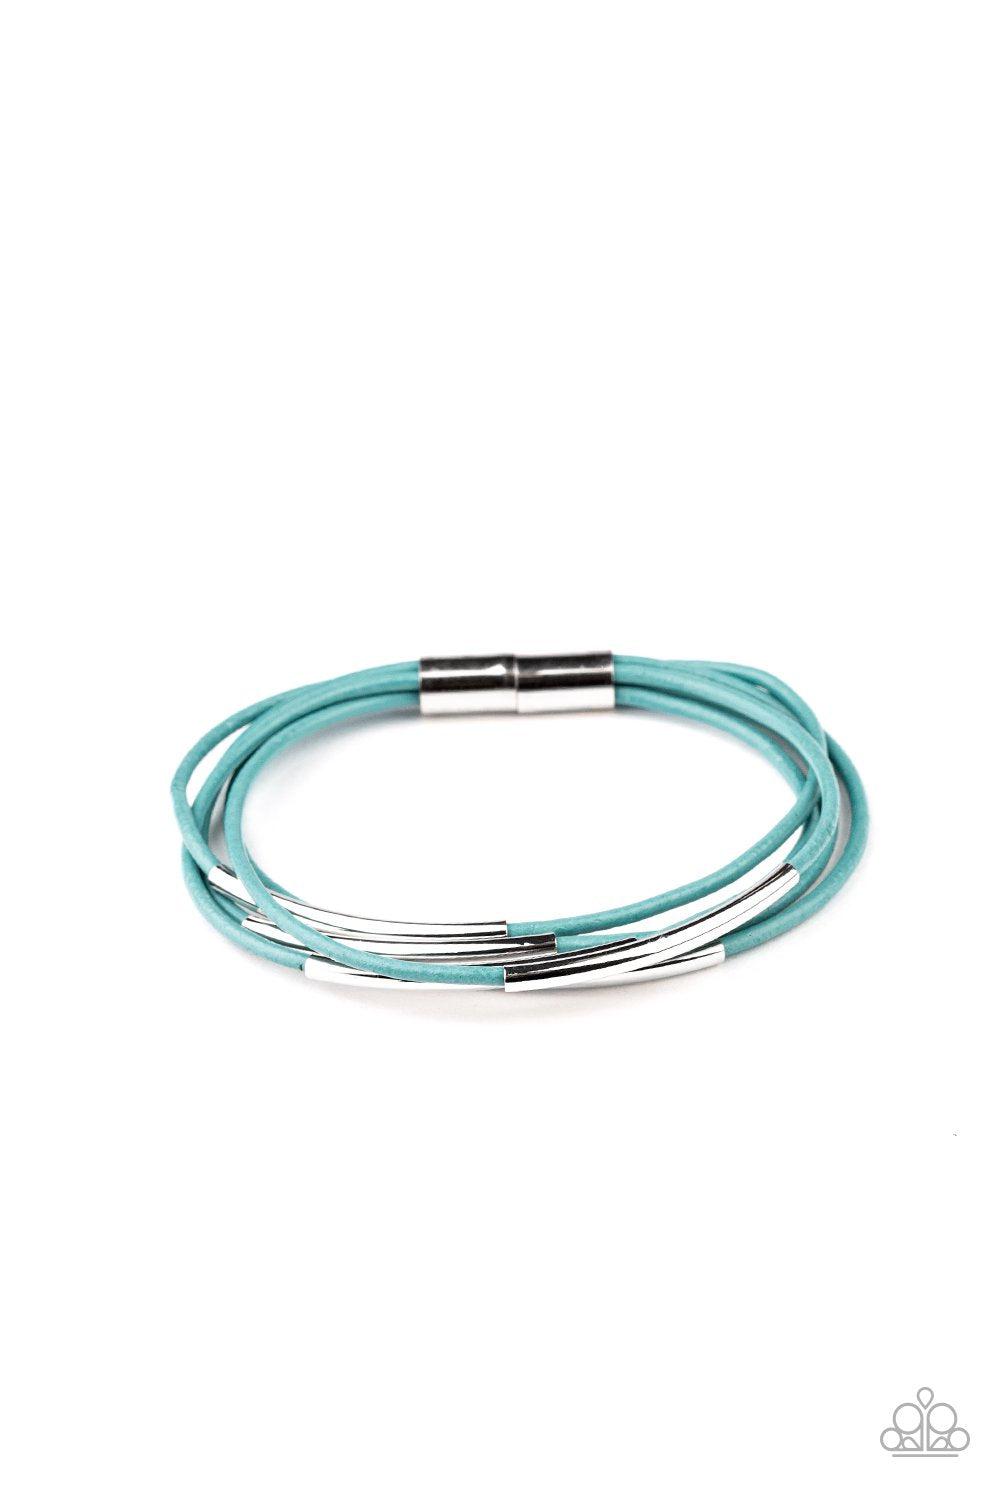 Power CORD Blue Suede and Silver Magnetic Bracelet - Paparazzi Accessories-CarasShop.com - $5 Jewelry by Cara Jewels